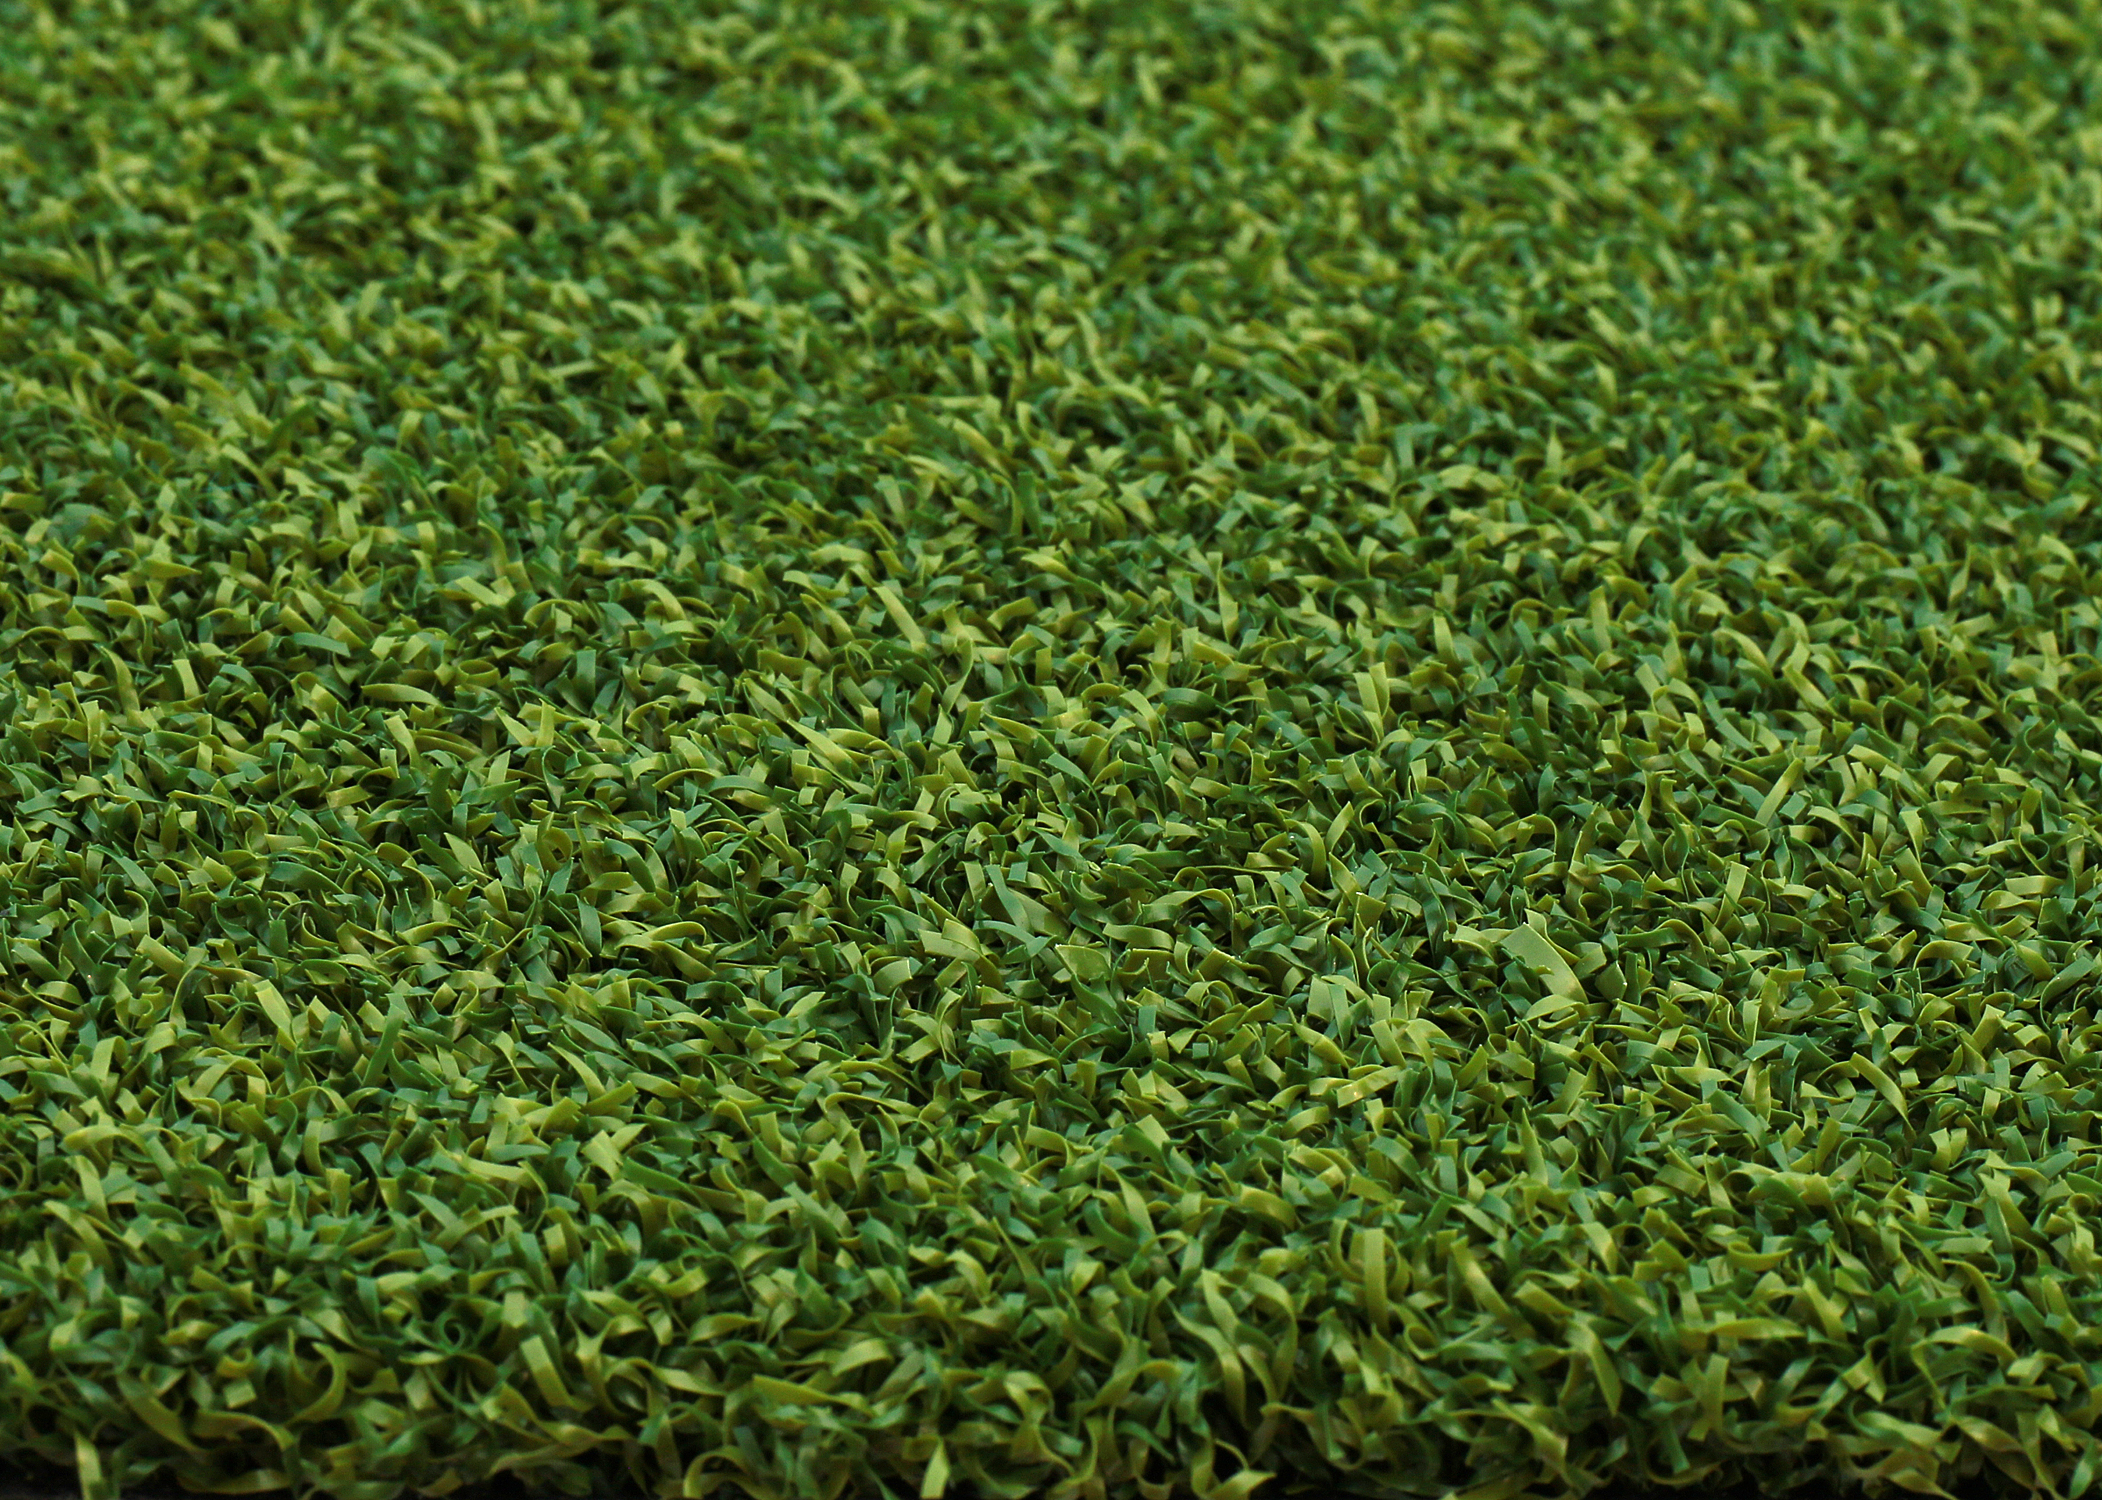 High Quality Light Green putting green for home golf